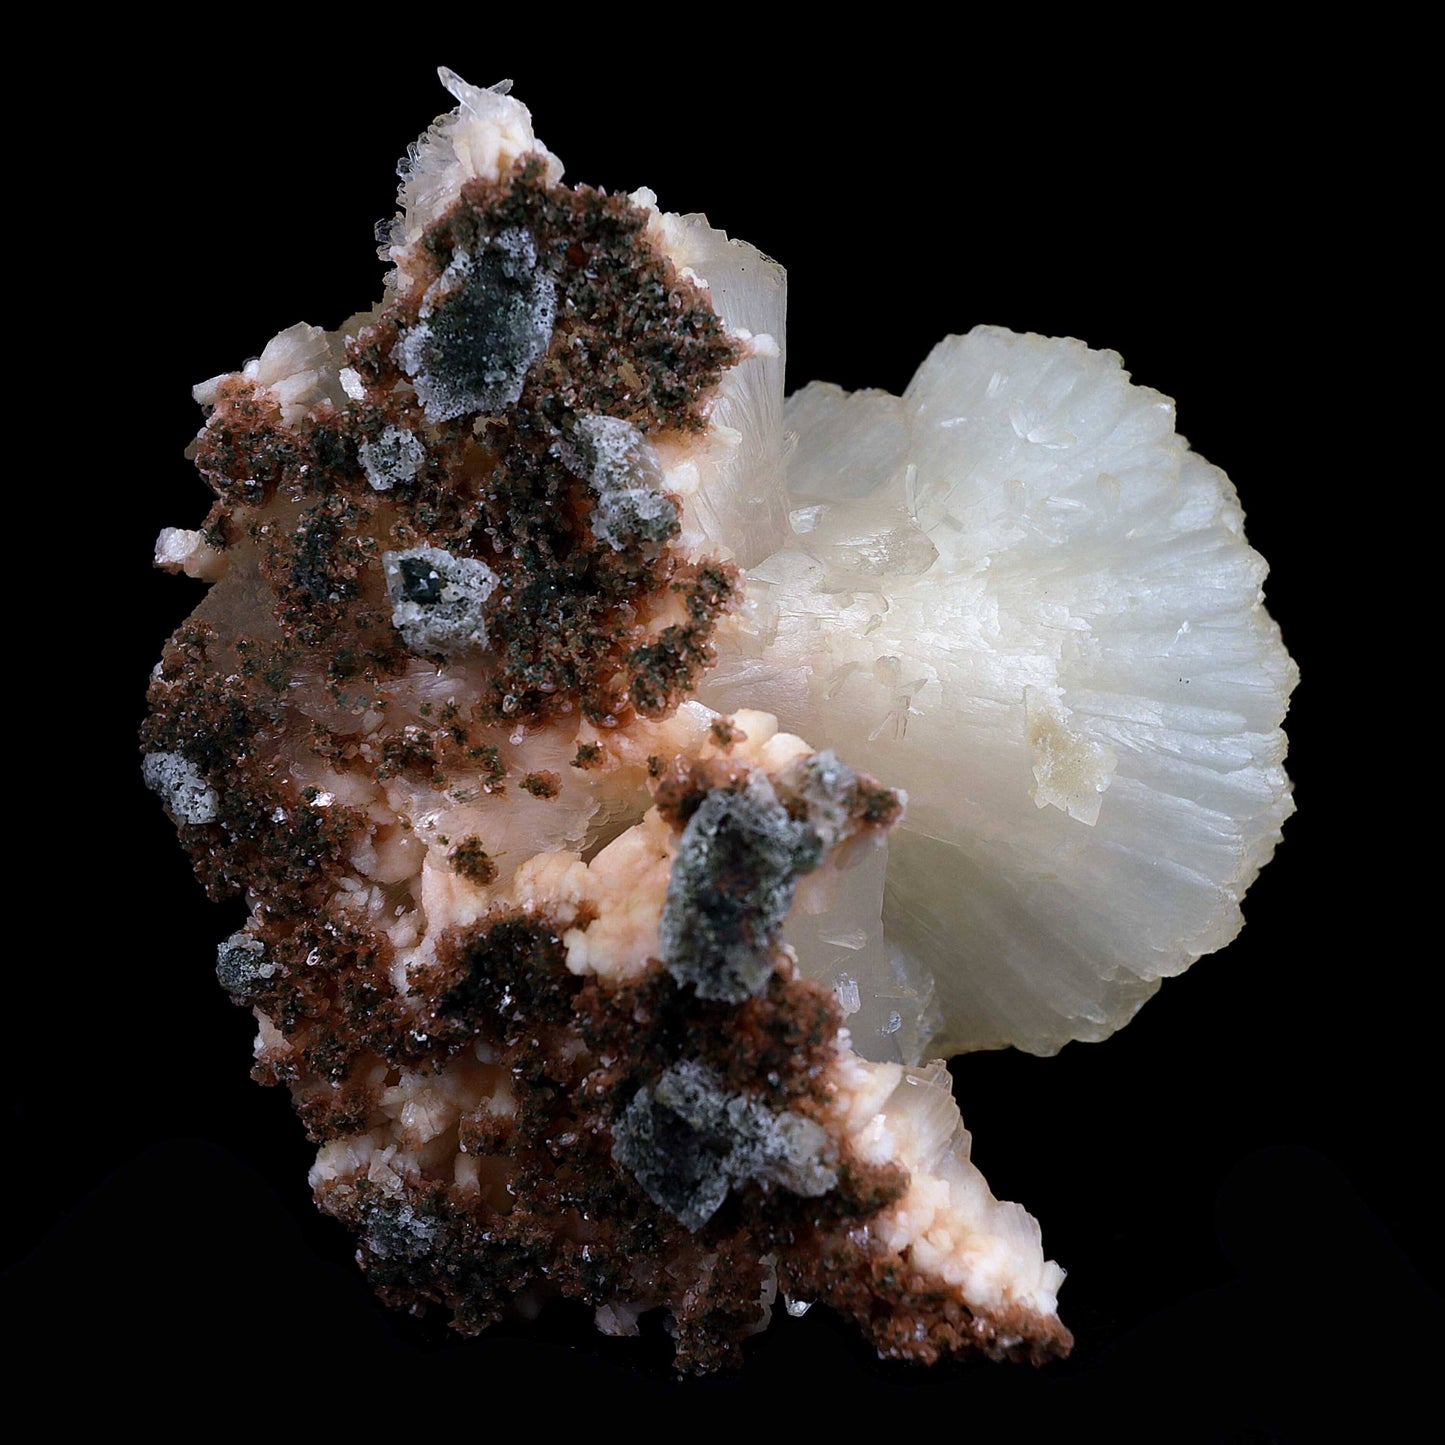 Stilbite Perfect Bow-tie on Heulandite Natural Mineral Specimen # B 4…  https://www.superbminerals.us/products/stilbite-perfect-bow-tie-on-heulandite-natural-mineral-specimen-b-4515  Features:From Jalgaon, a huge ivory stilbite bowtie of exceptional quality. Set atop a thin crust, bordered by glassy, colourless Heulandite crystals, it is visually pleasing. Bowtie has a high sheen and is in excellent condition. In this area, it's quite rare to find a product of this size and quality. 